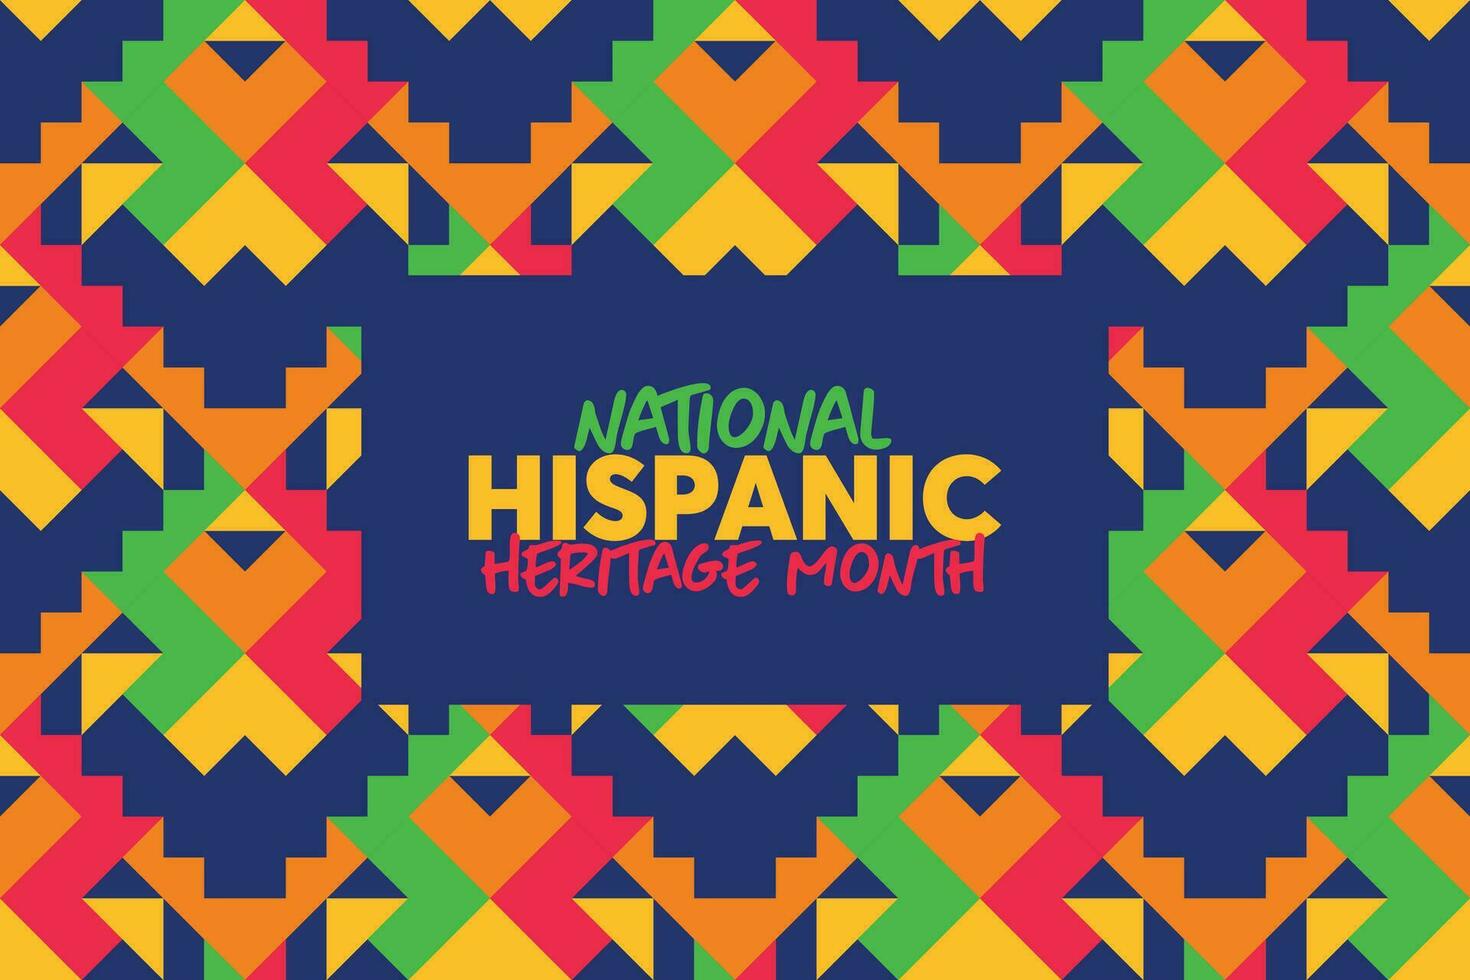 Hispanic heritage month. Vector web banner, poster, card for social media and networks. Greeting with national Hispanic heritage month text, Papel Picado pattern, perforated paper on black background